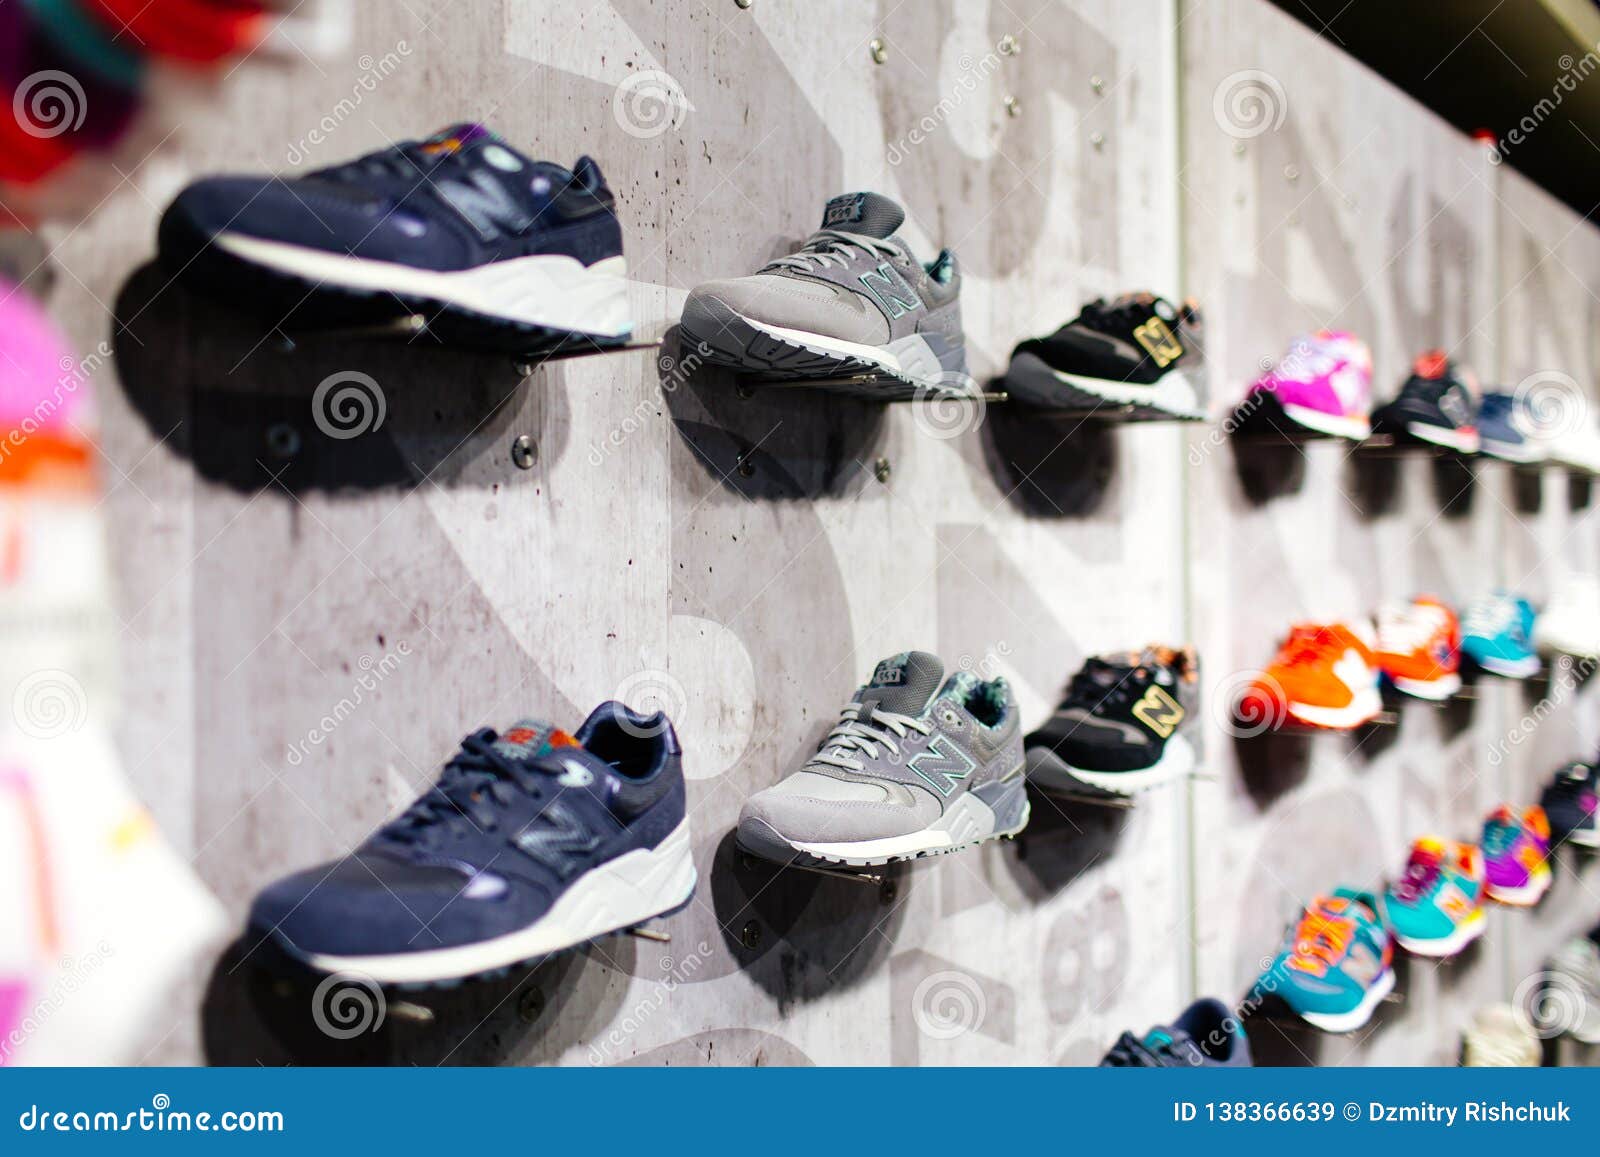 MADRID, SPAIN - SEPTEMBER 9 2018: New Balance Athletic Shoes on a Sports  Shop Counter Editorial Stock Image - Image of hongkong, commerce: 138366639